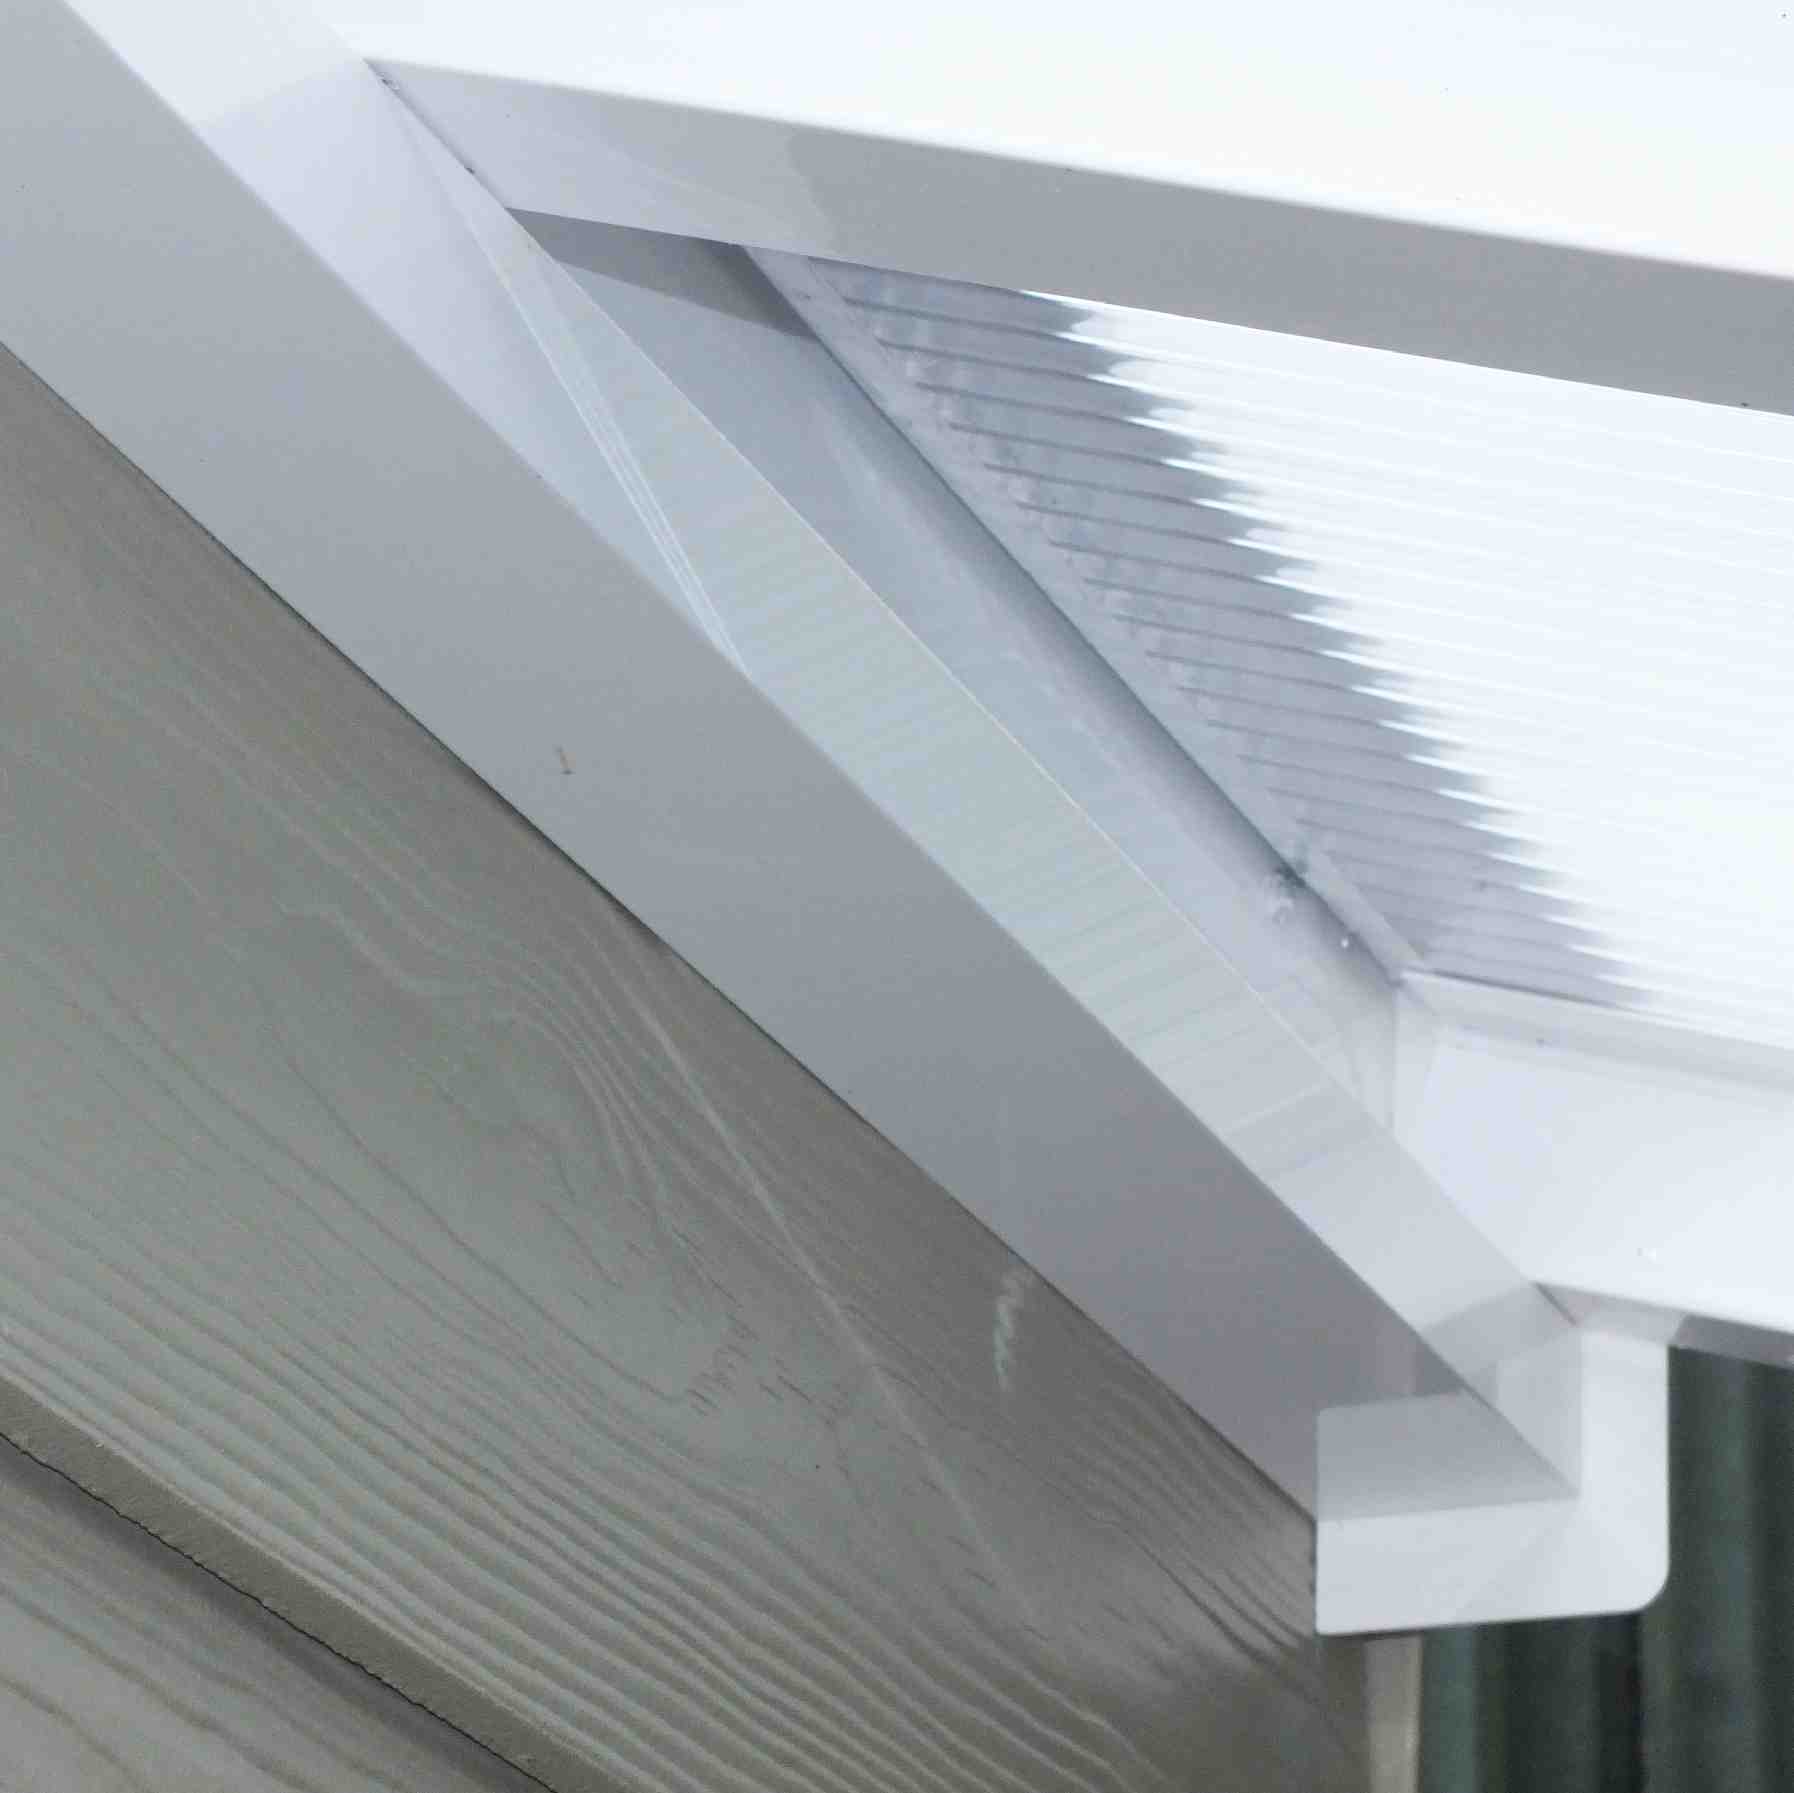 Great deals on Omega Verandah White with 16mm Polycarbonate Glazing - 8.0m (W) x 4.5m (P), (4) Supporting Posts